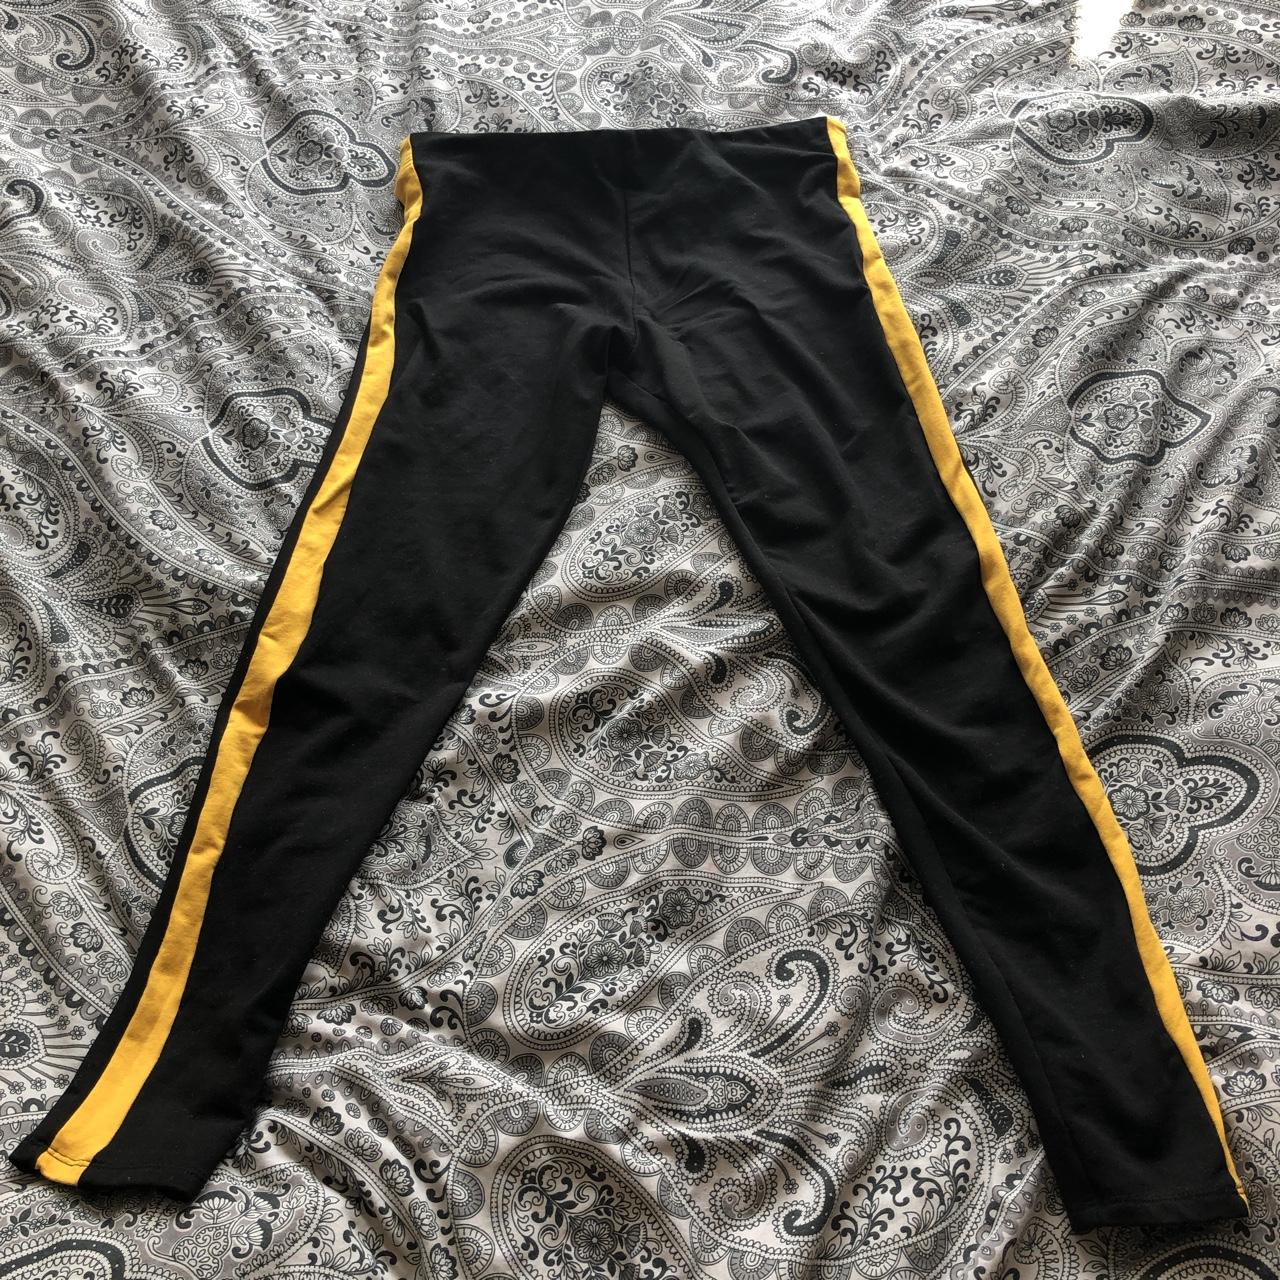 SMALL H&M LEGGINGS with yellow/gold stripe down - Depop